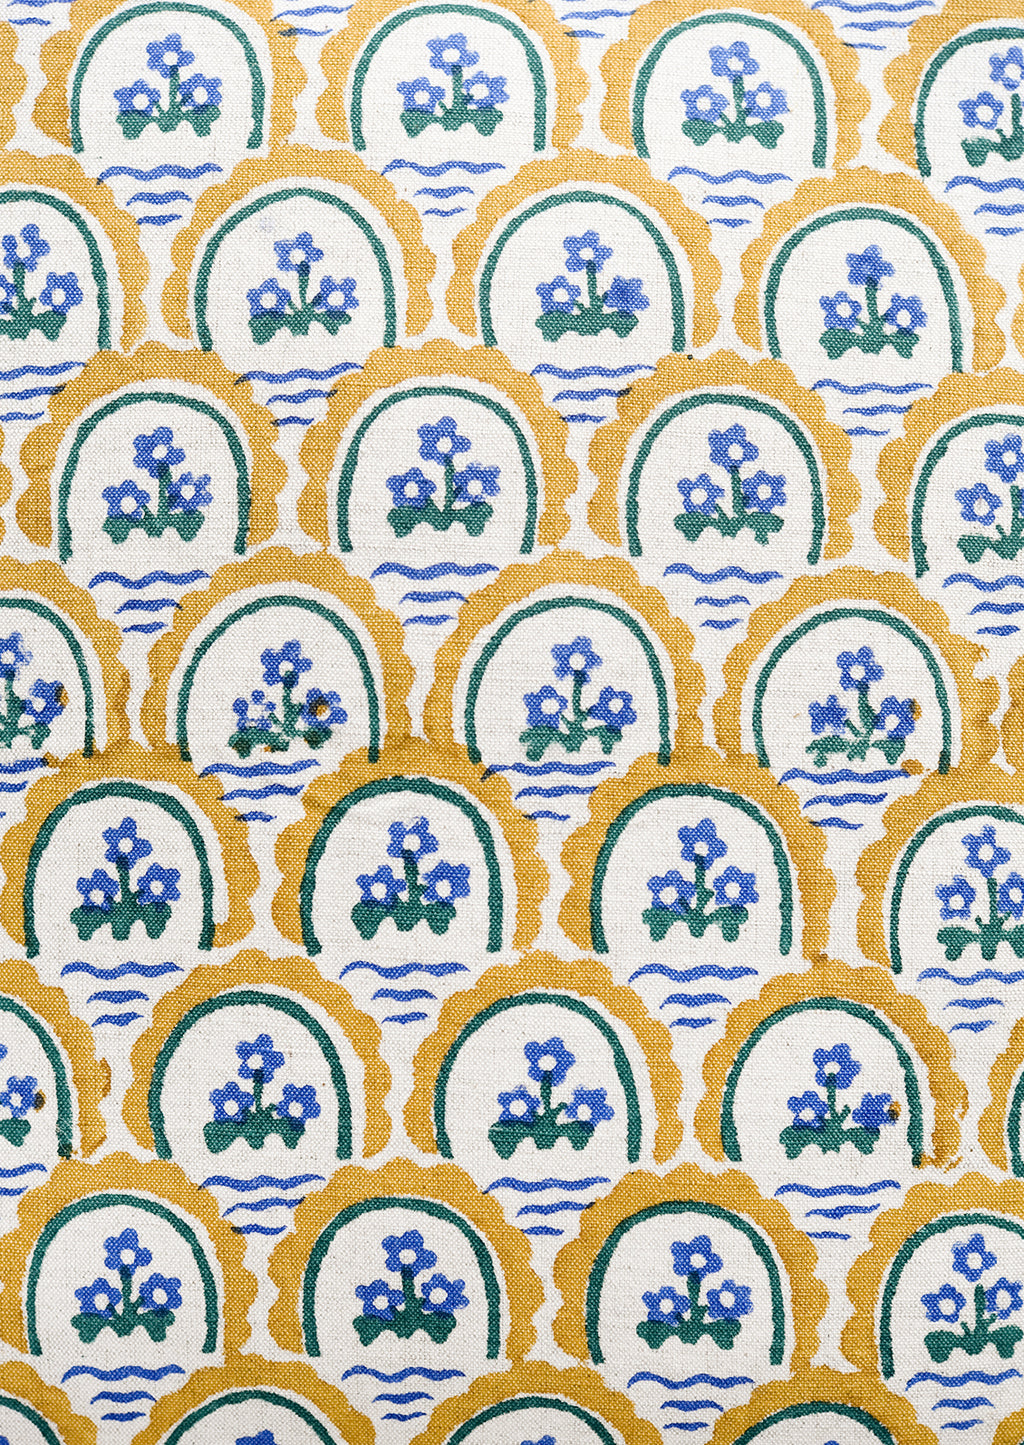 4: Yellow and blue floral block print motif.